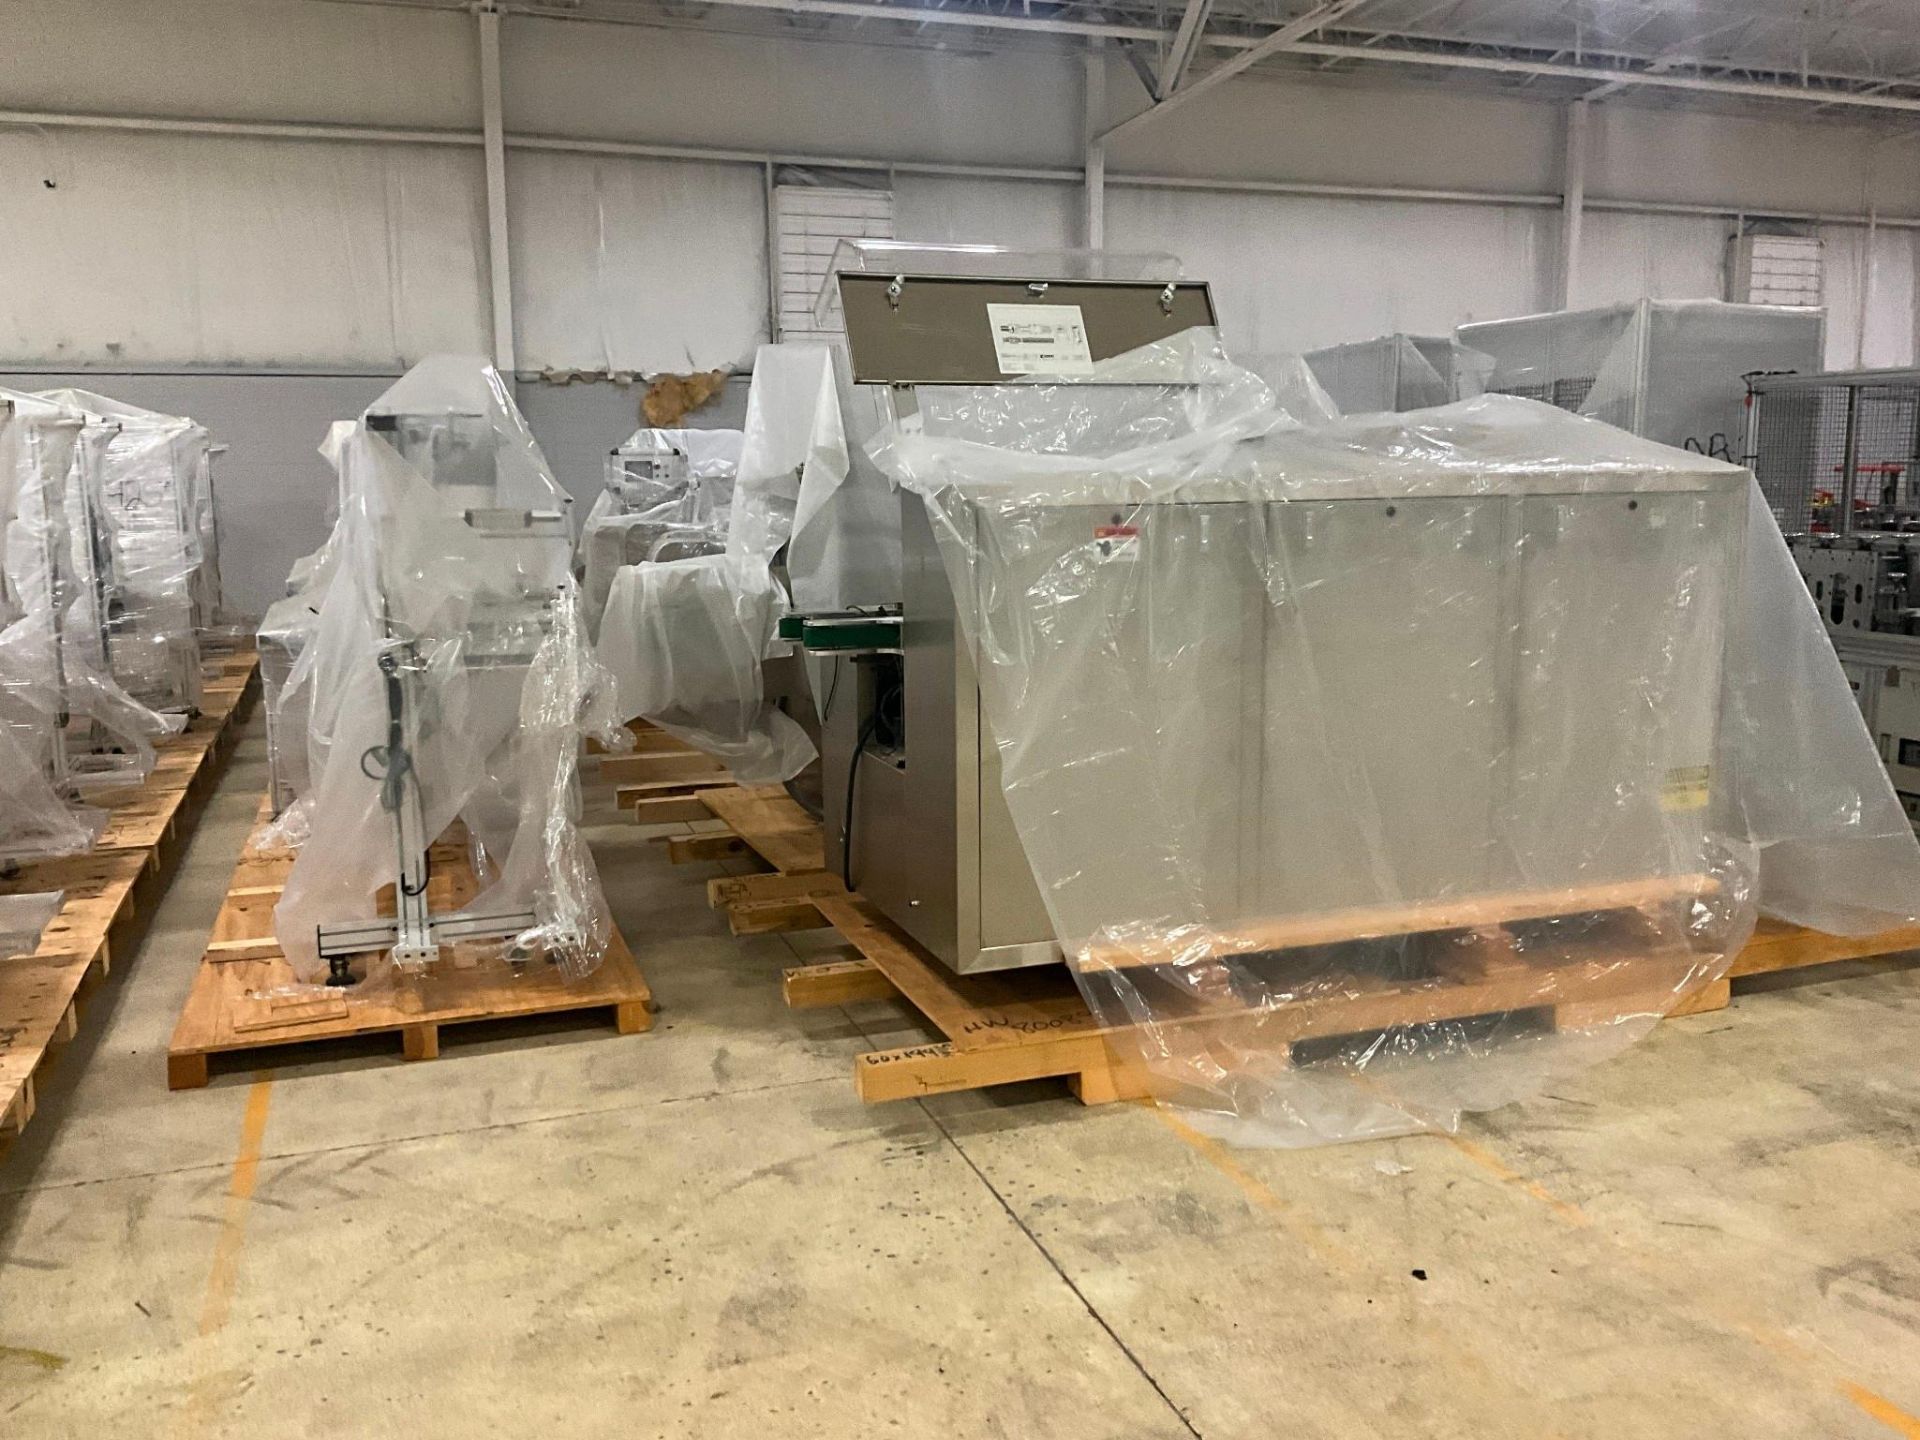 (38) 2020 KYD AUTOMATIC MASK MACHINE WITH ROLL BACK,CUTTER,EARLOOP WELDER, & CONVEYOR - CRATED - Image 24 of 62